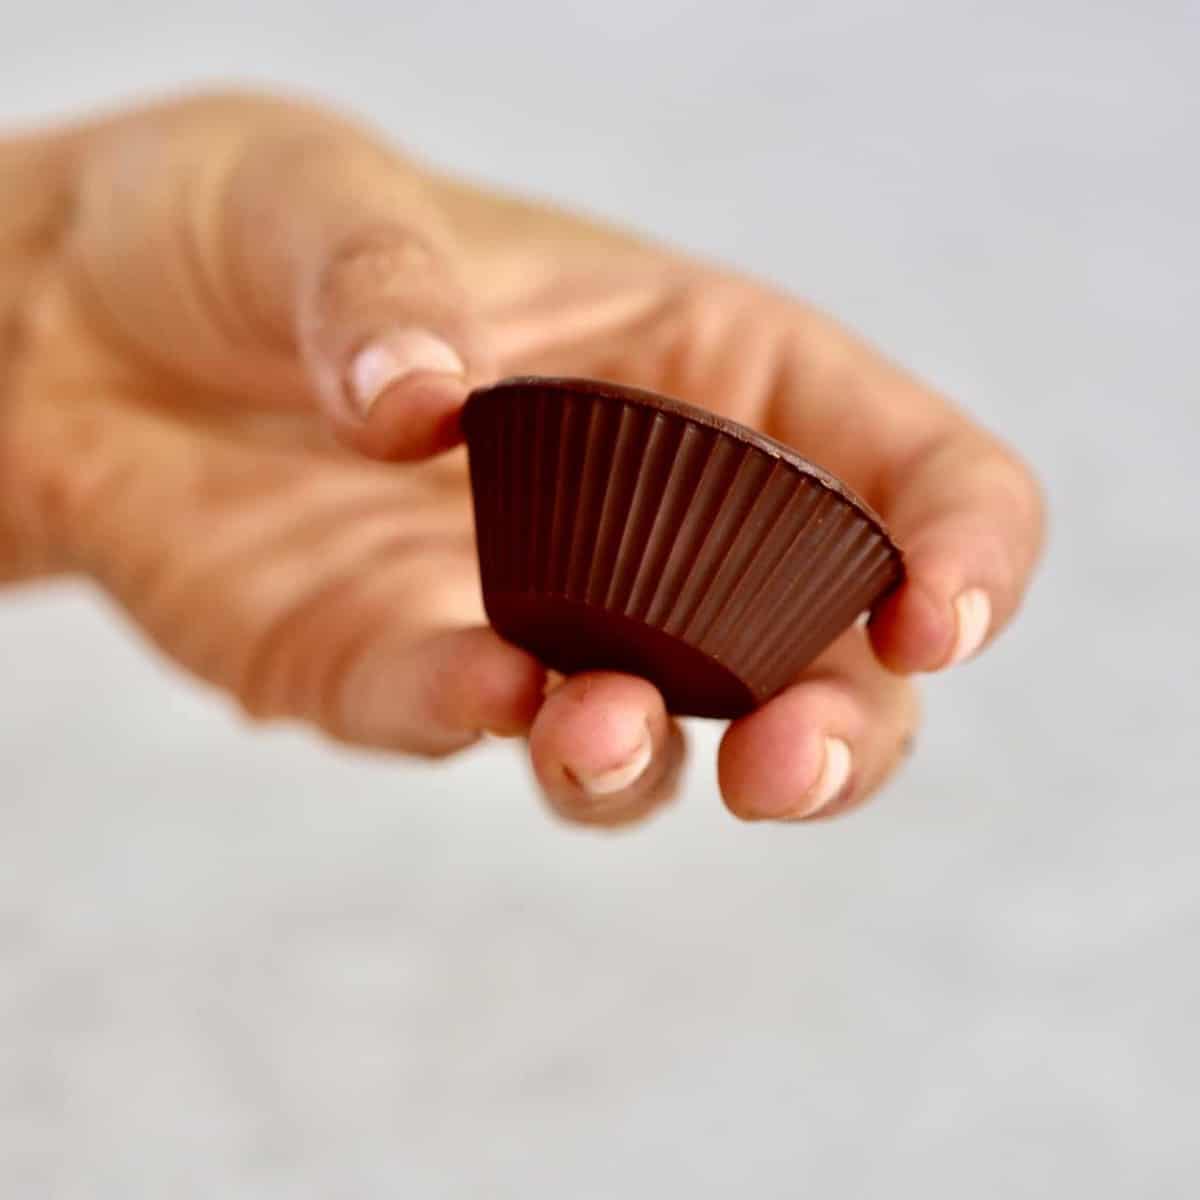 holding 1 chocolate peanut butter cup 